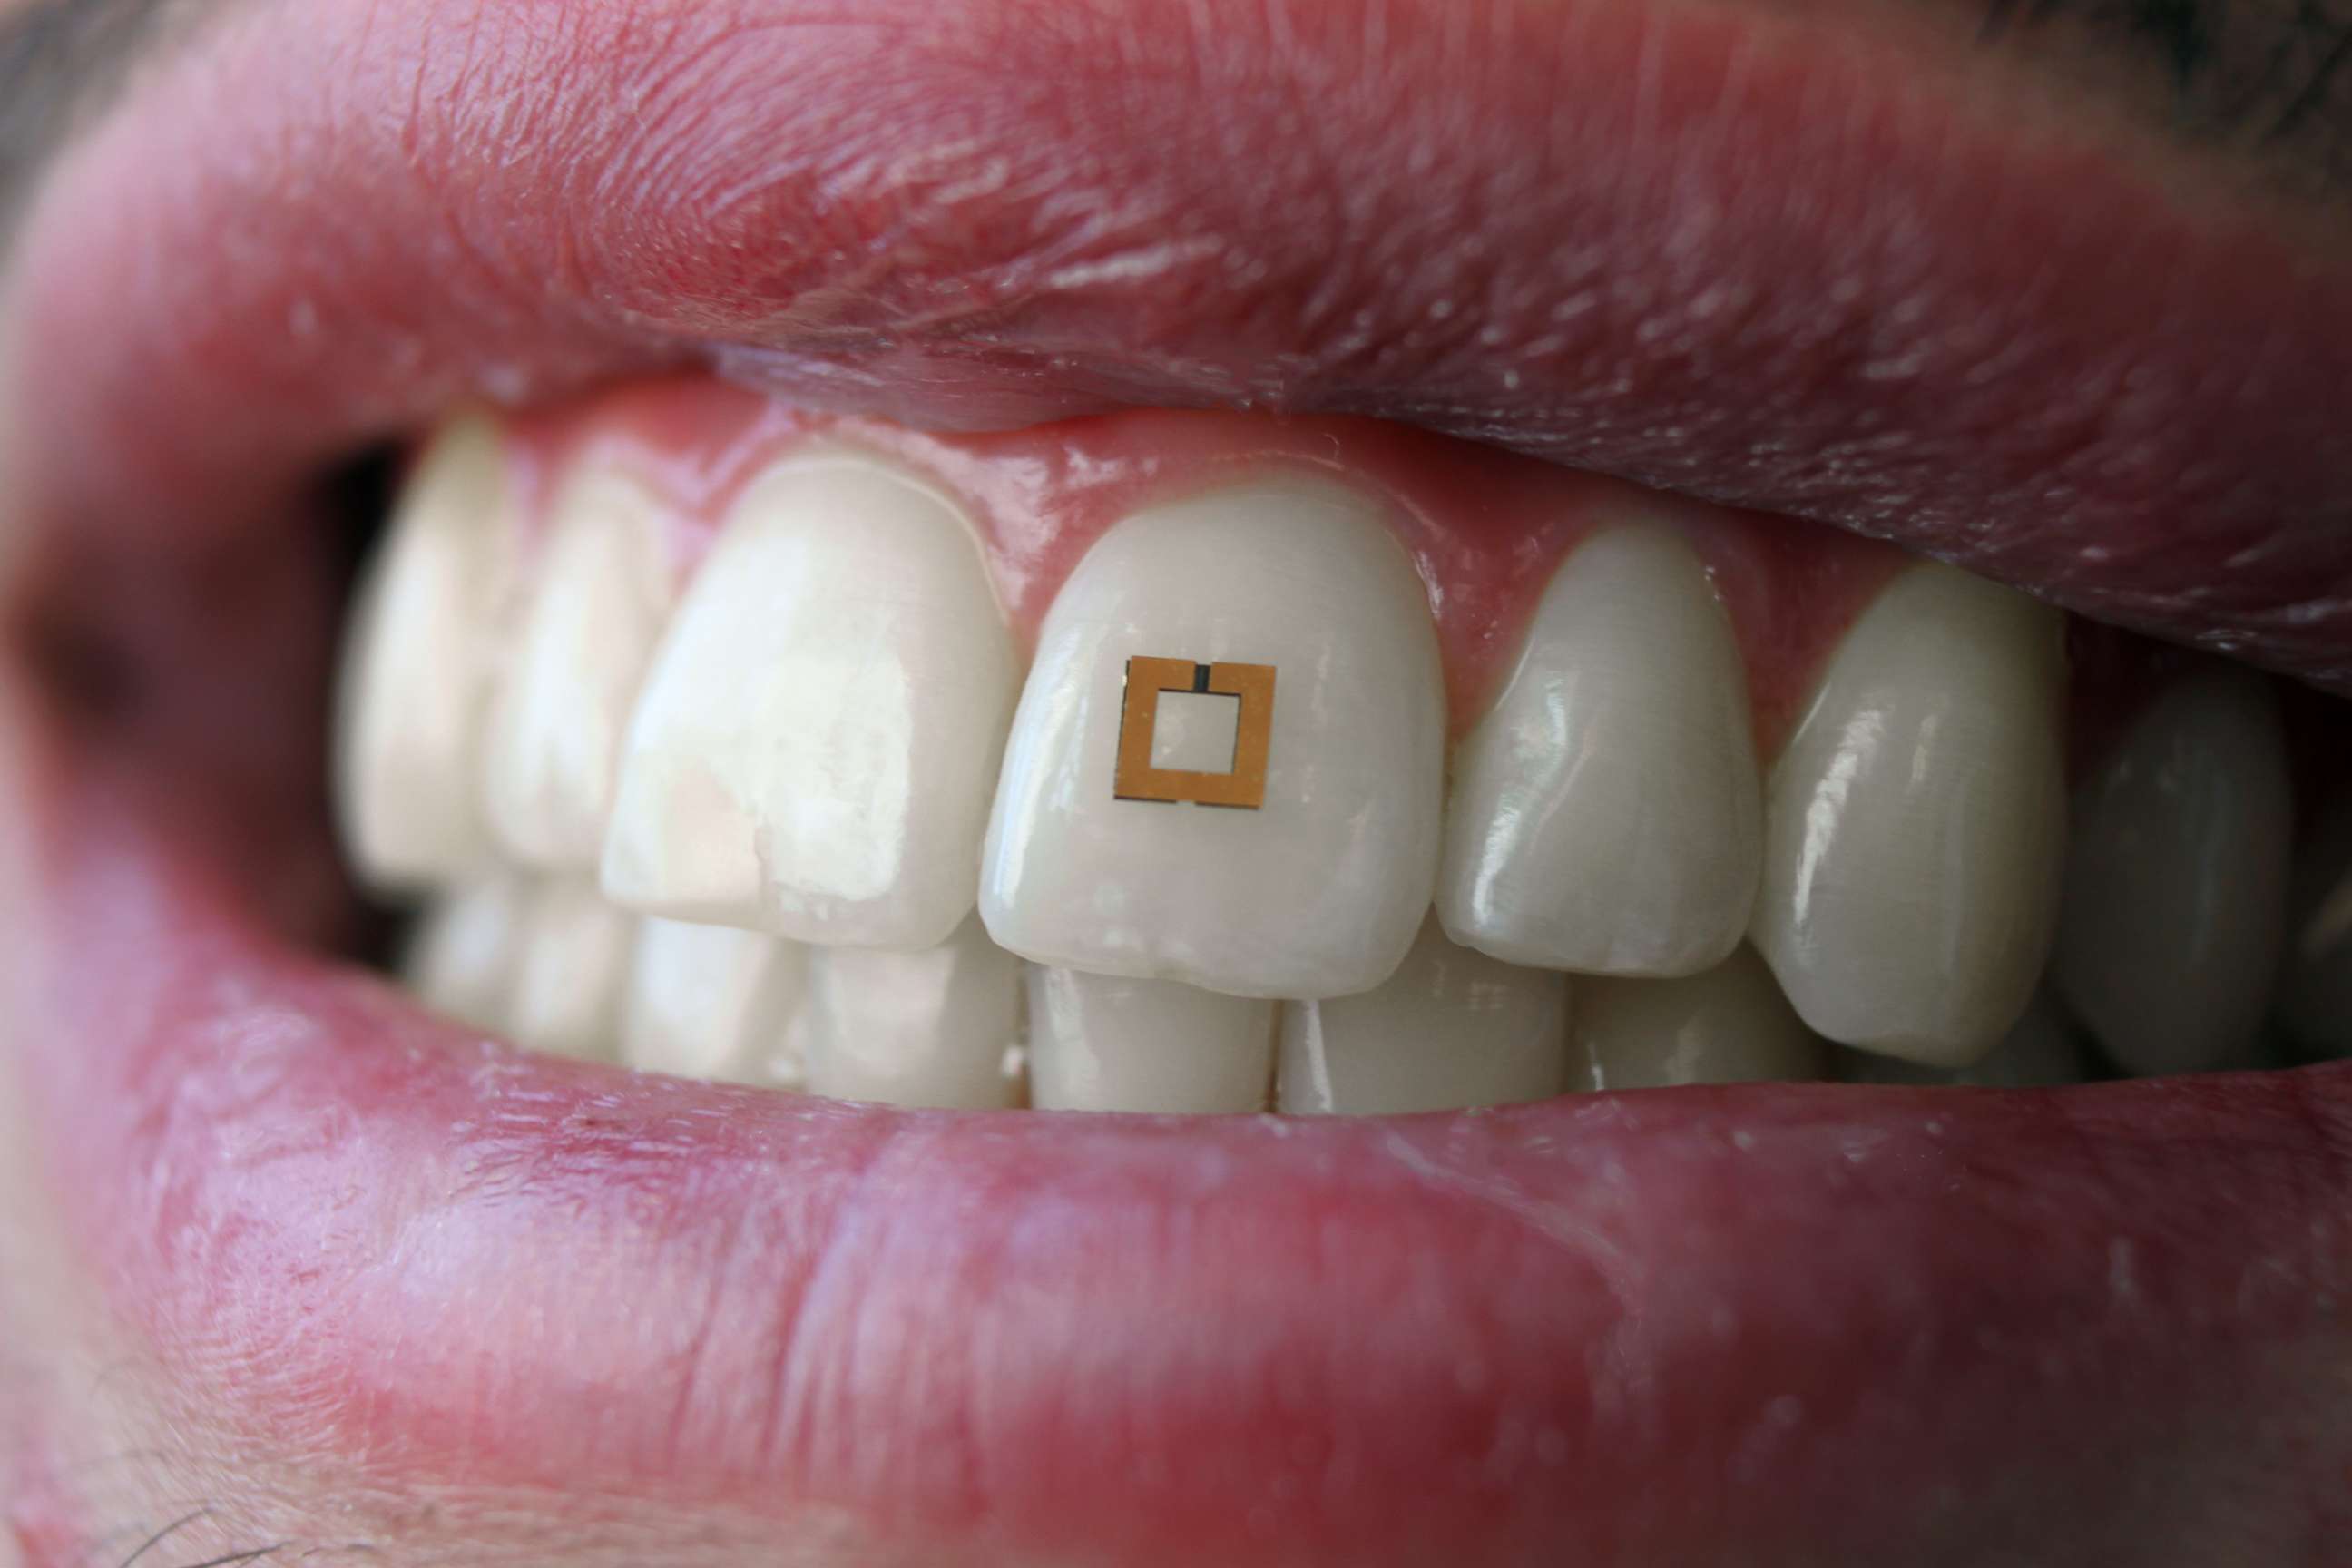 PHOTO: Researchers at Tufts University are experimenting with sensors attached to human teeth that might be able to monitor food and caloric intake and send signals to nearby devices.